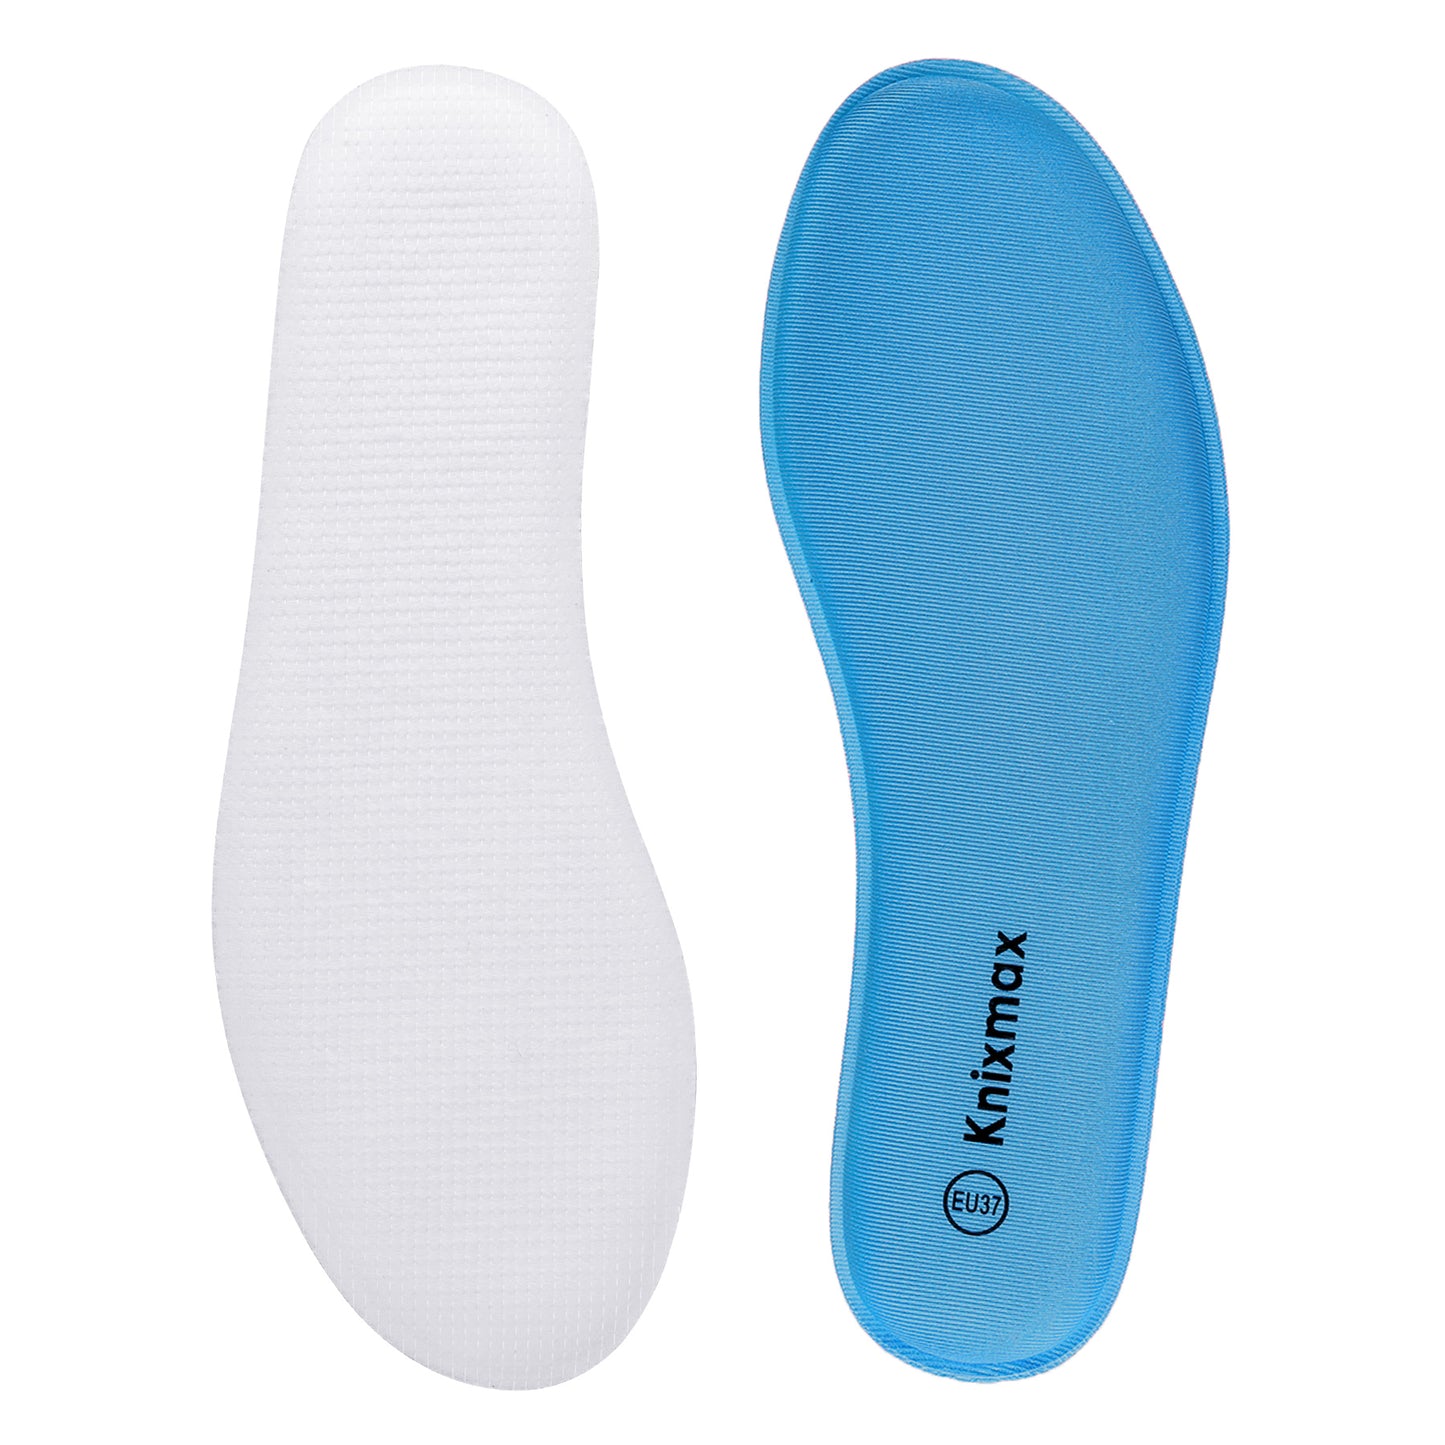 Knixmax Women's Memory Foam Insoles, Blue, for Athletic Shoes & Sneakers